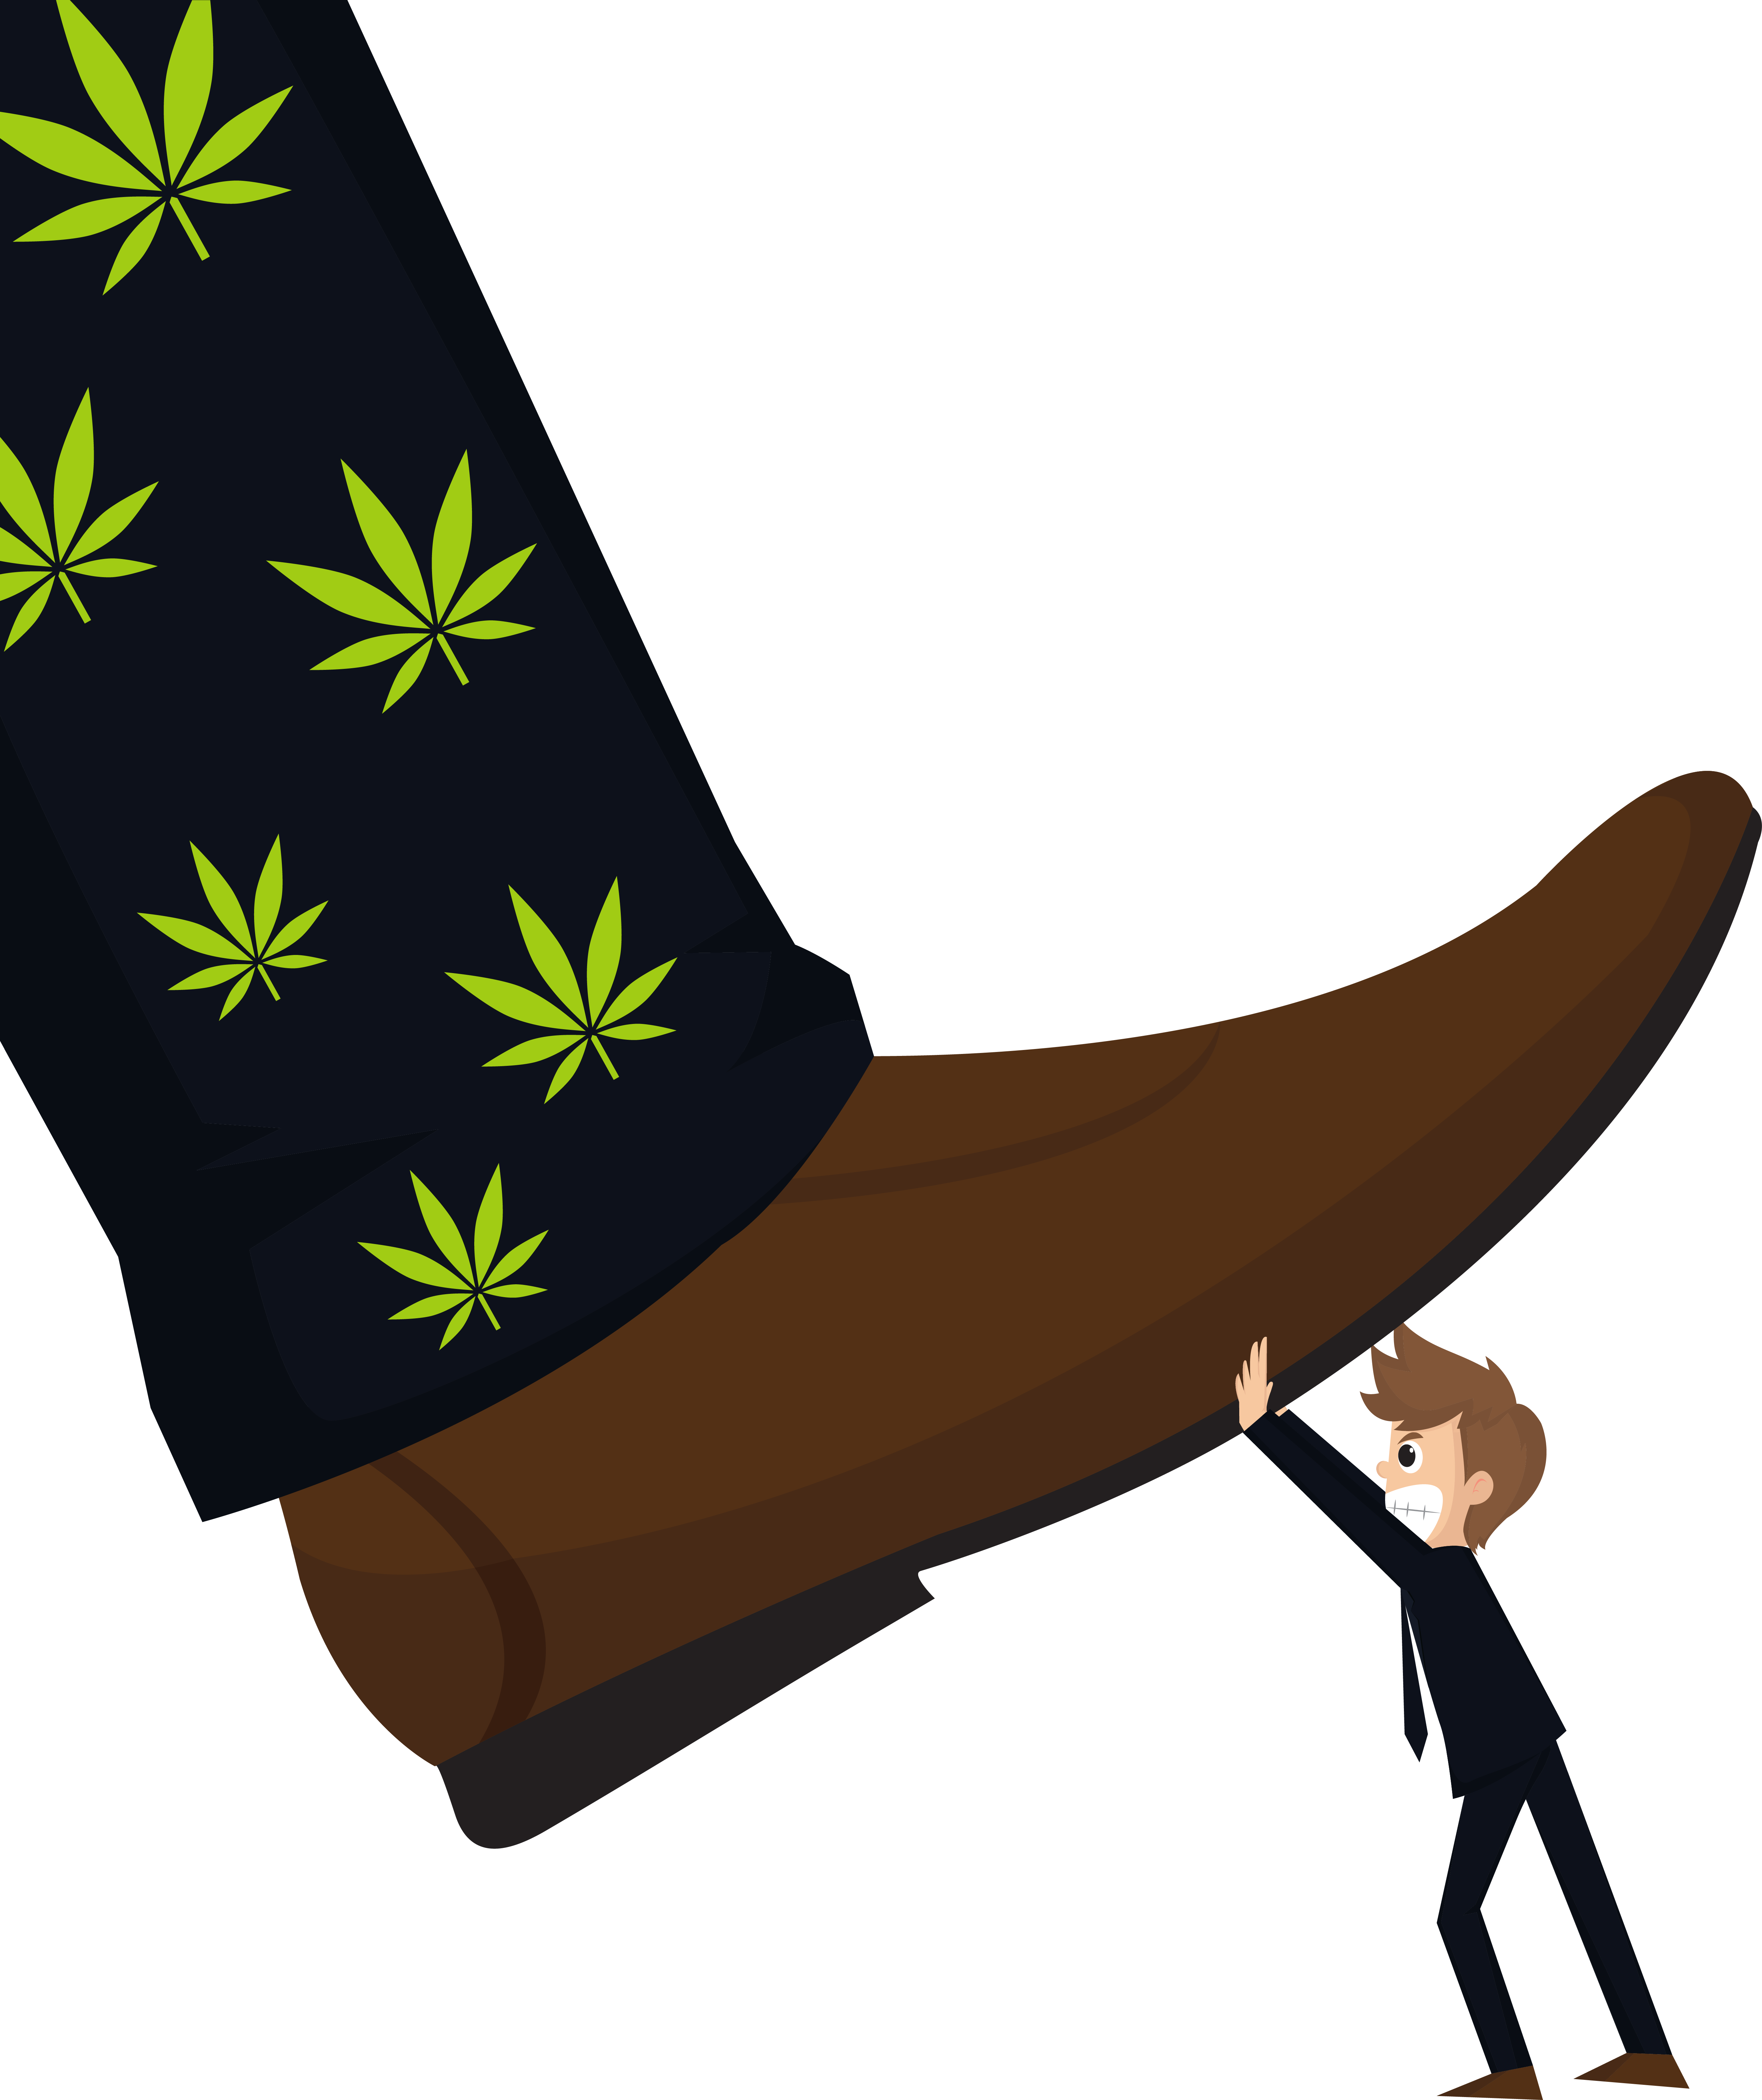 Stand Firm!  Solutins to Marijuana in the Workplace